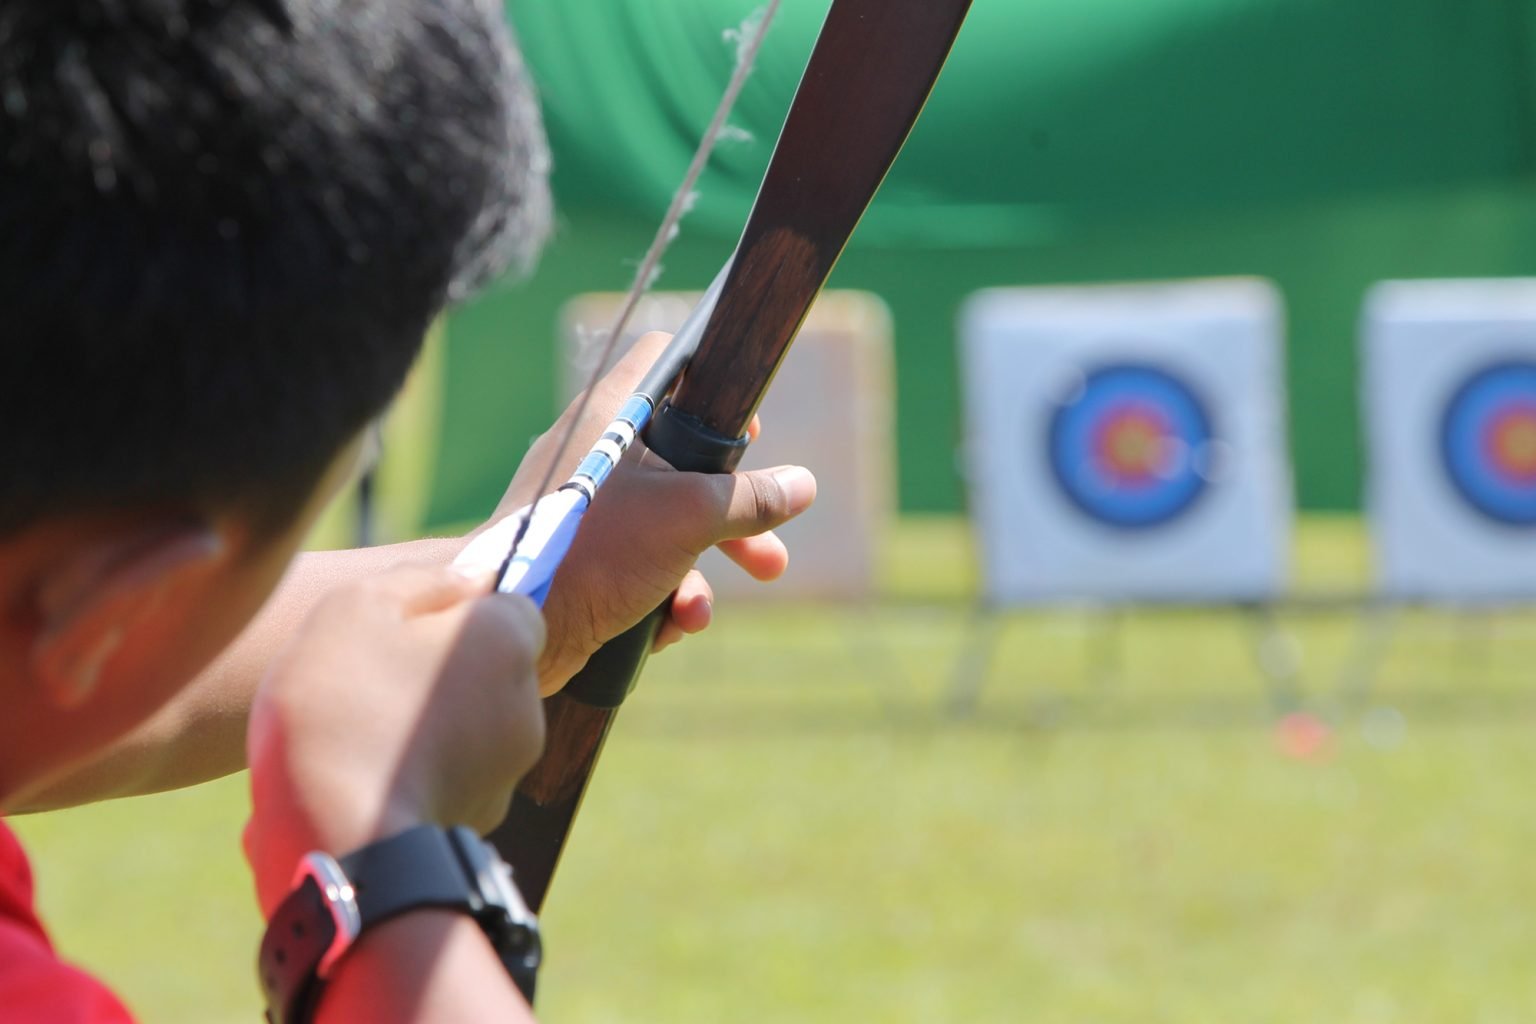 target ring and out of focus archer with a bow in the foreground during an archery competition